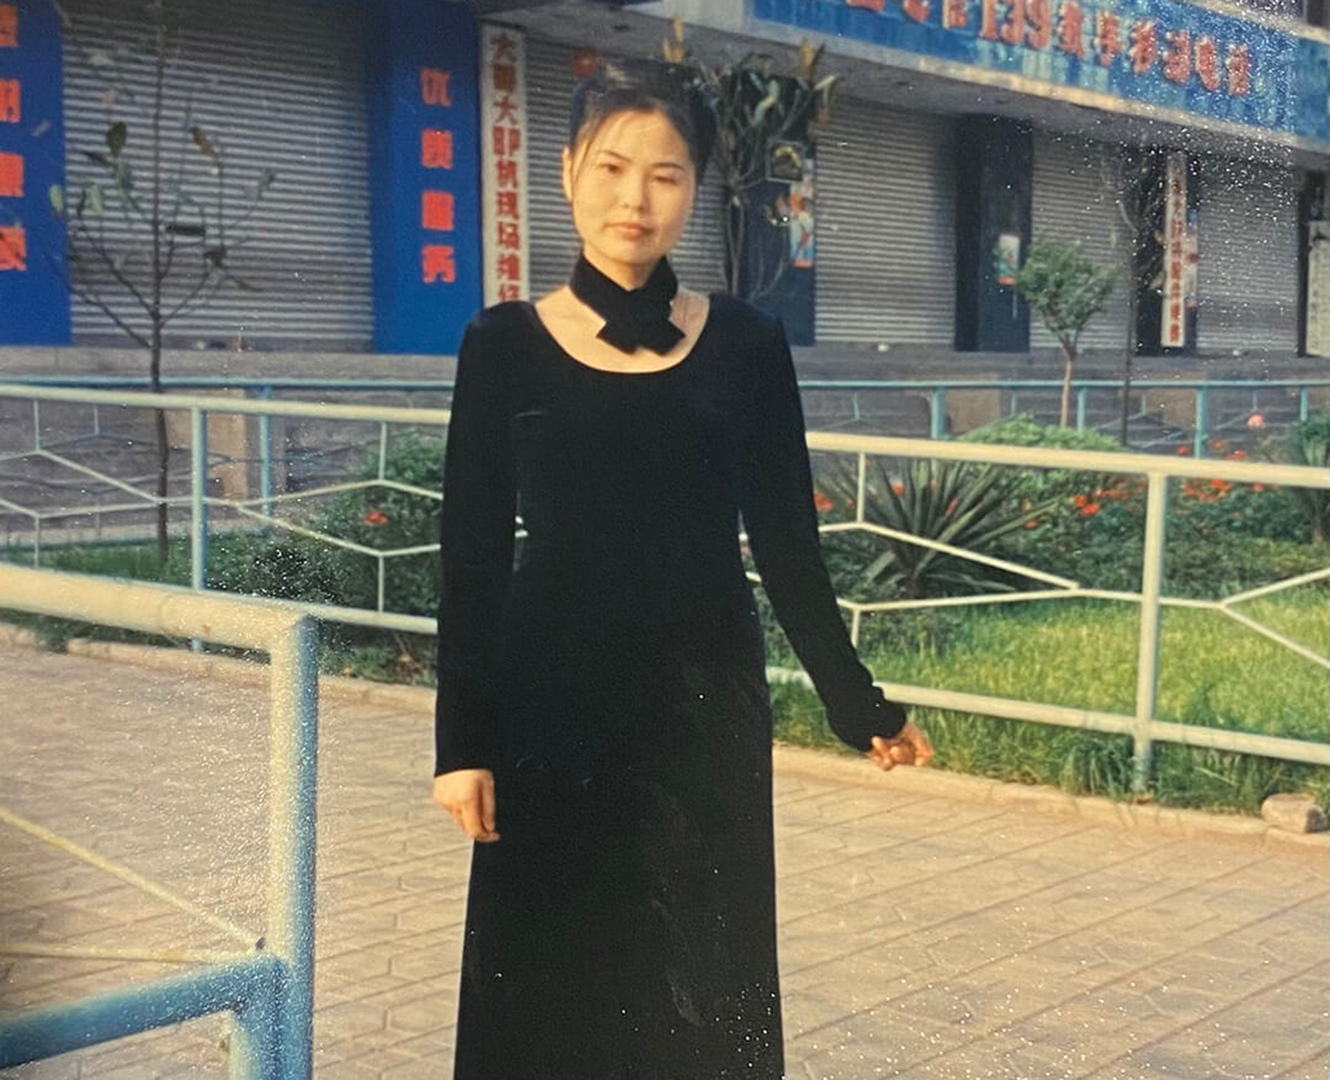 Hong stands in black dress on street in China.